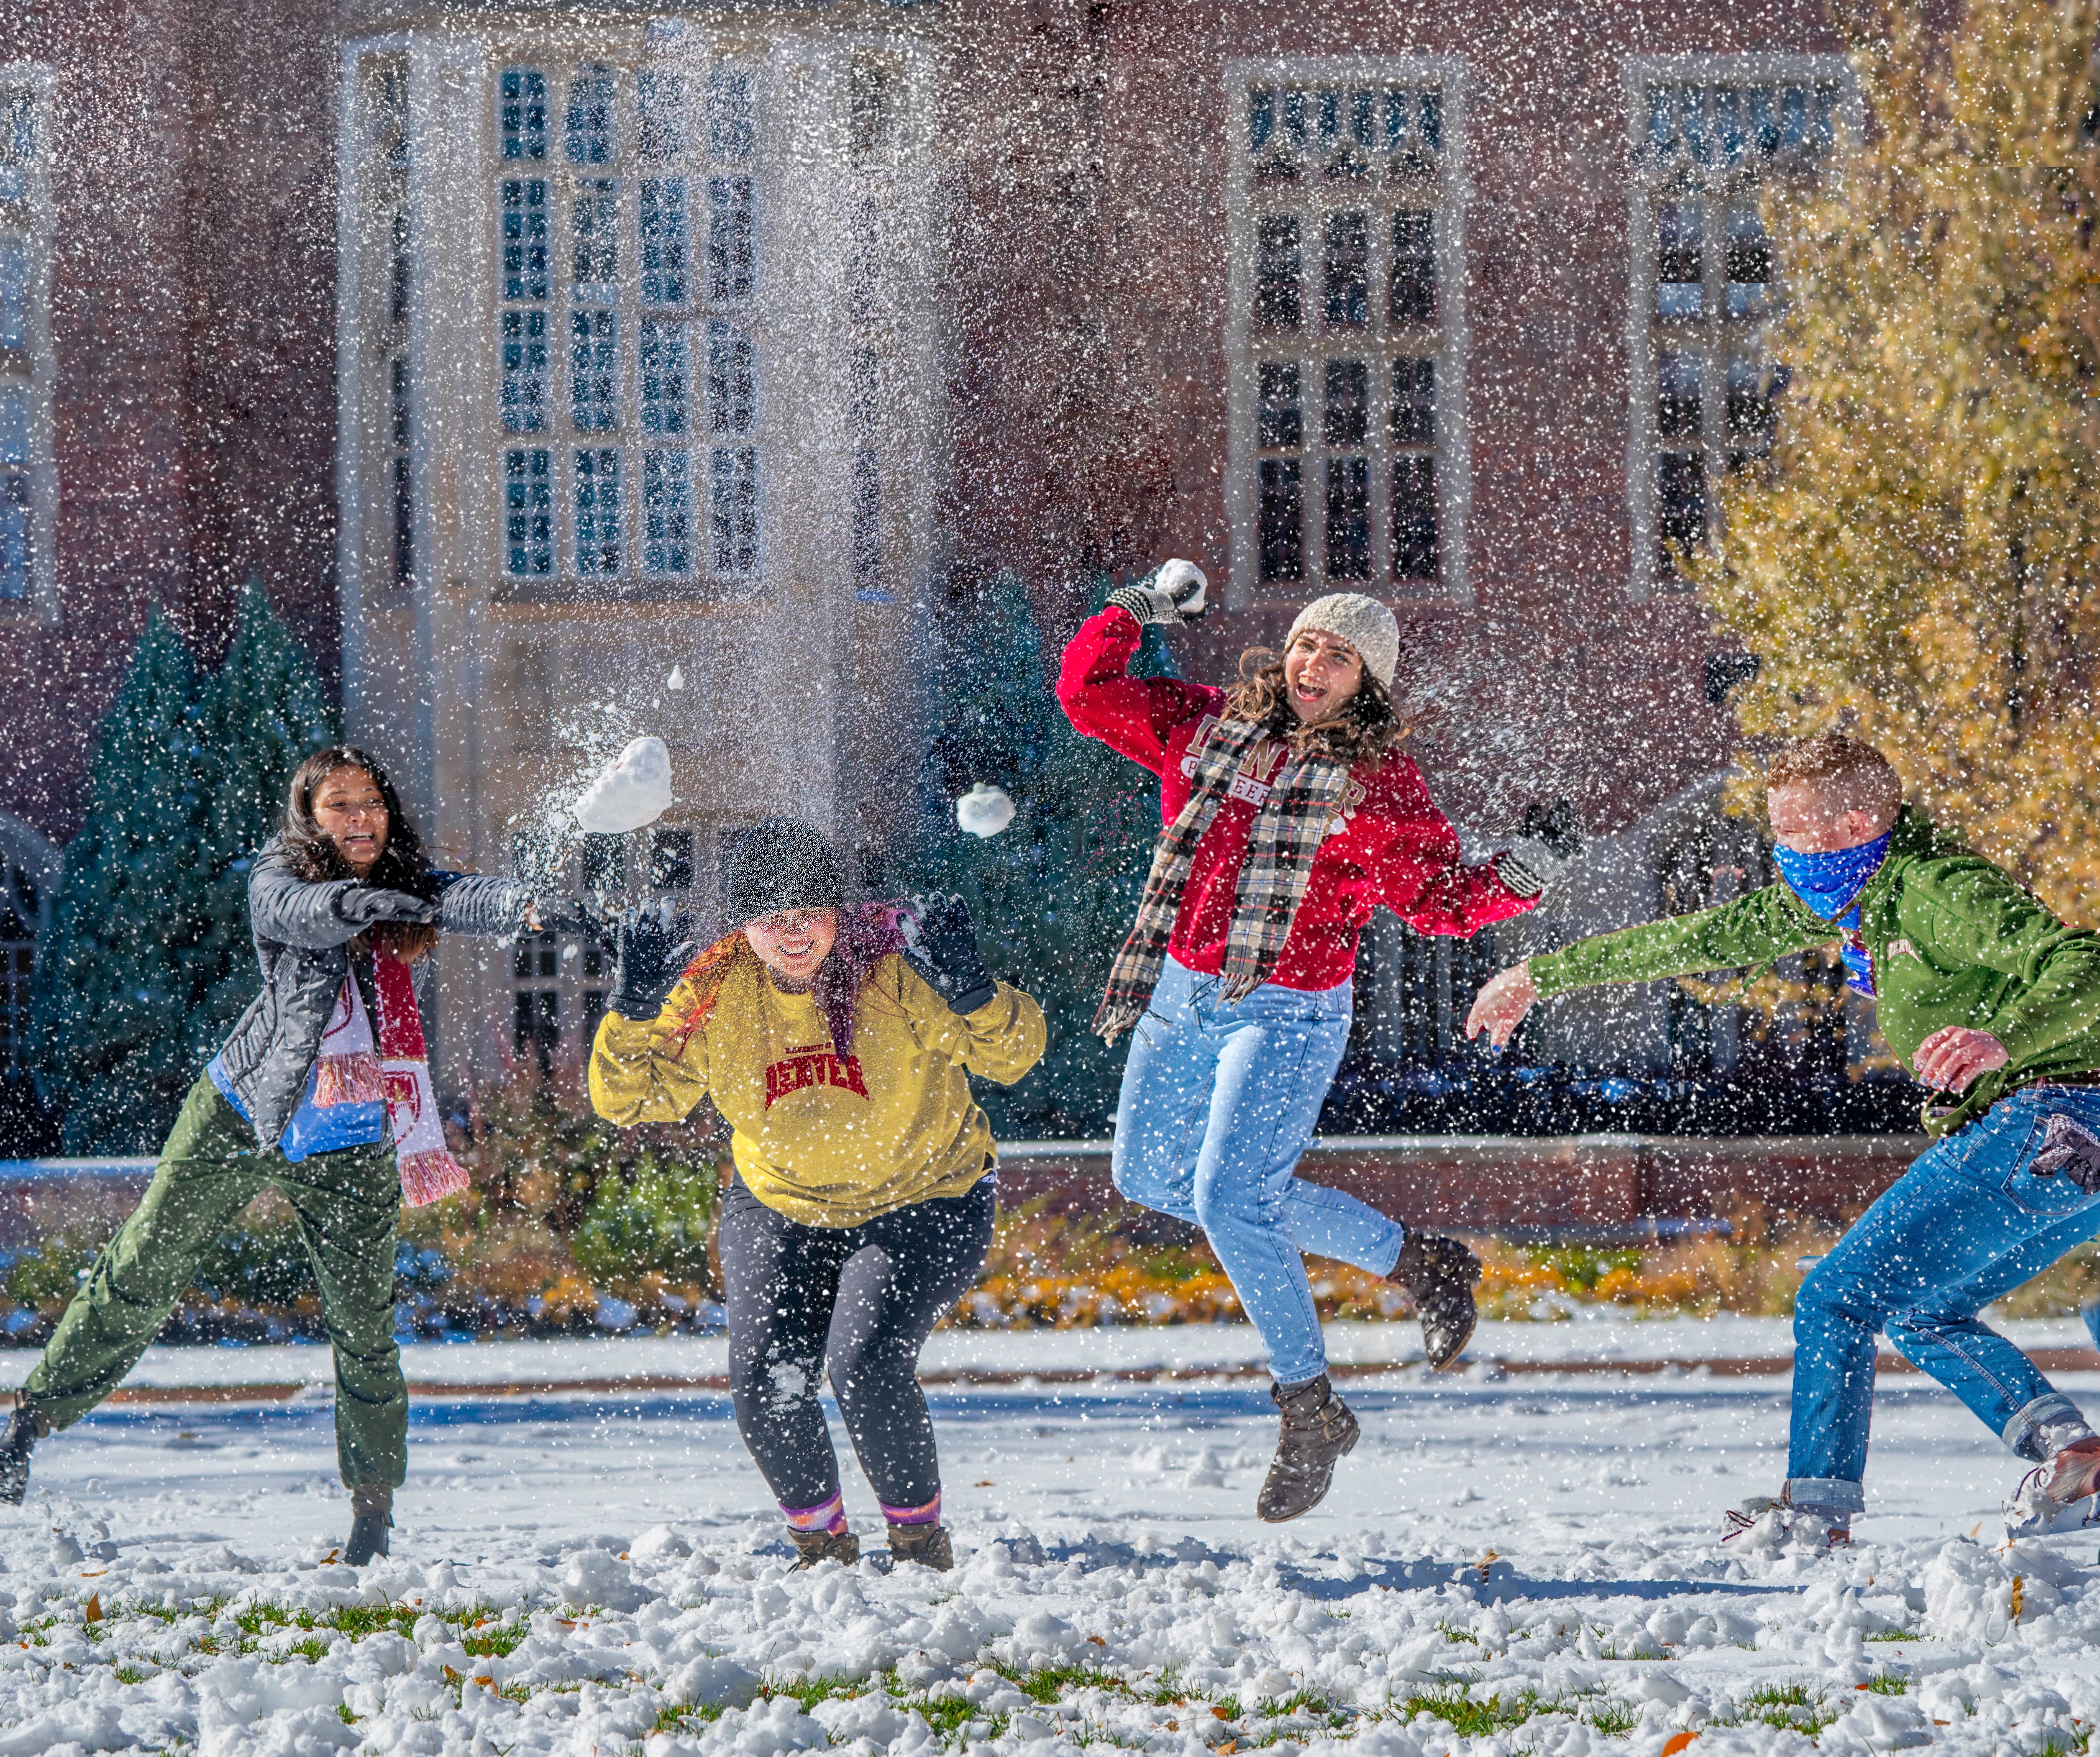 DU Students Having A Snowball Fight